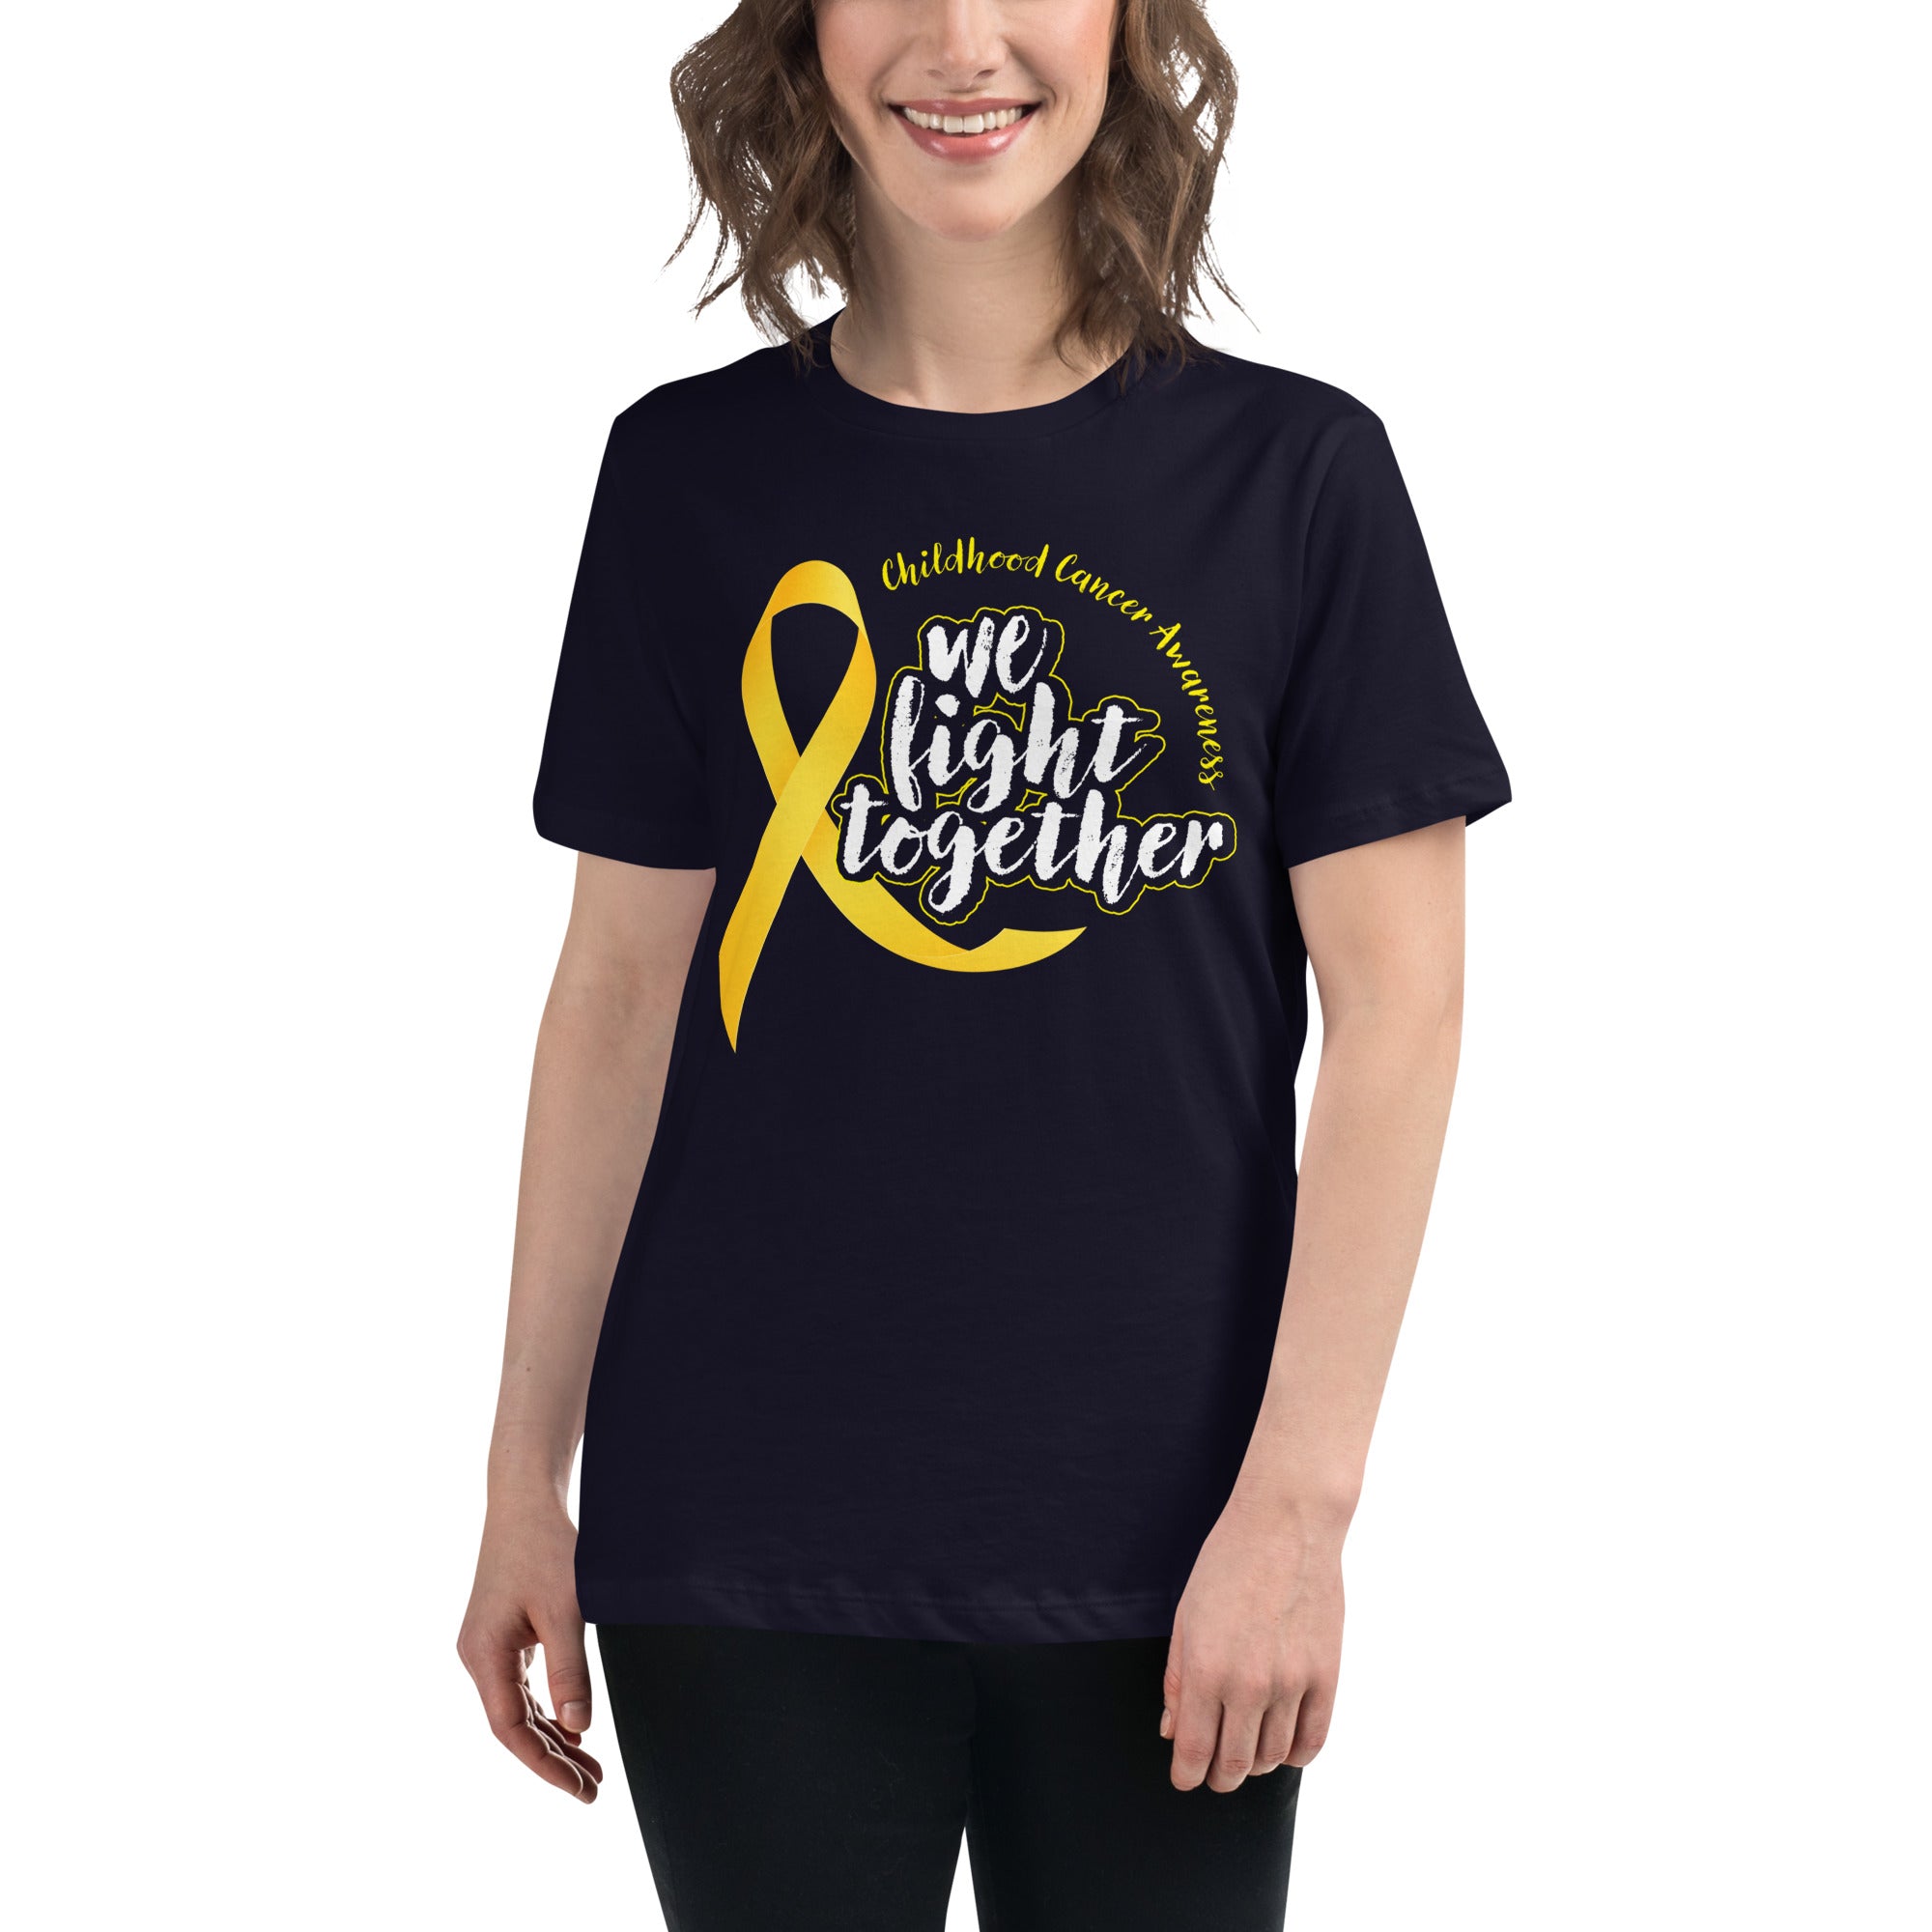 We Fight Together - Women's Relaxed T-Shirt Black